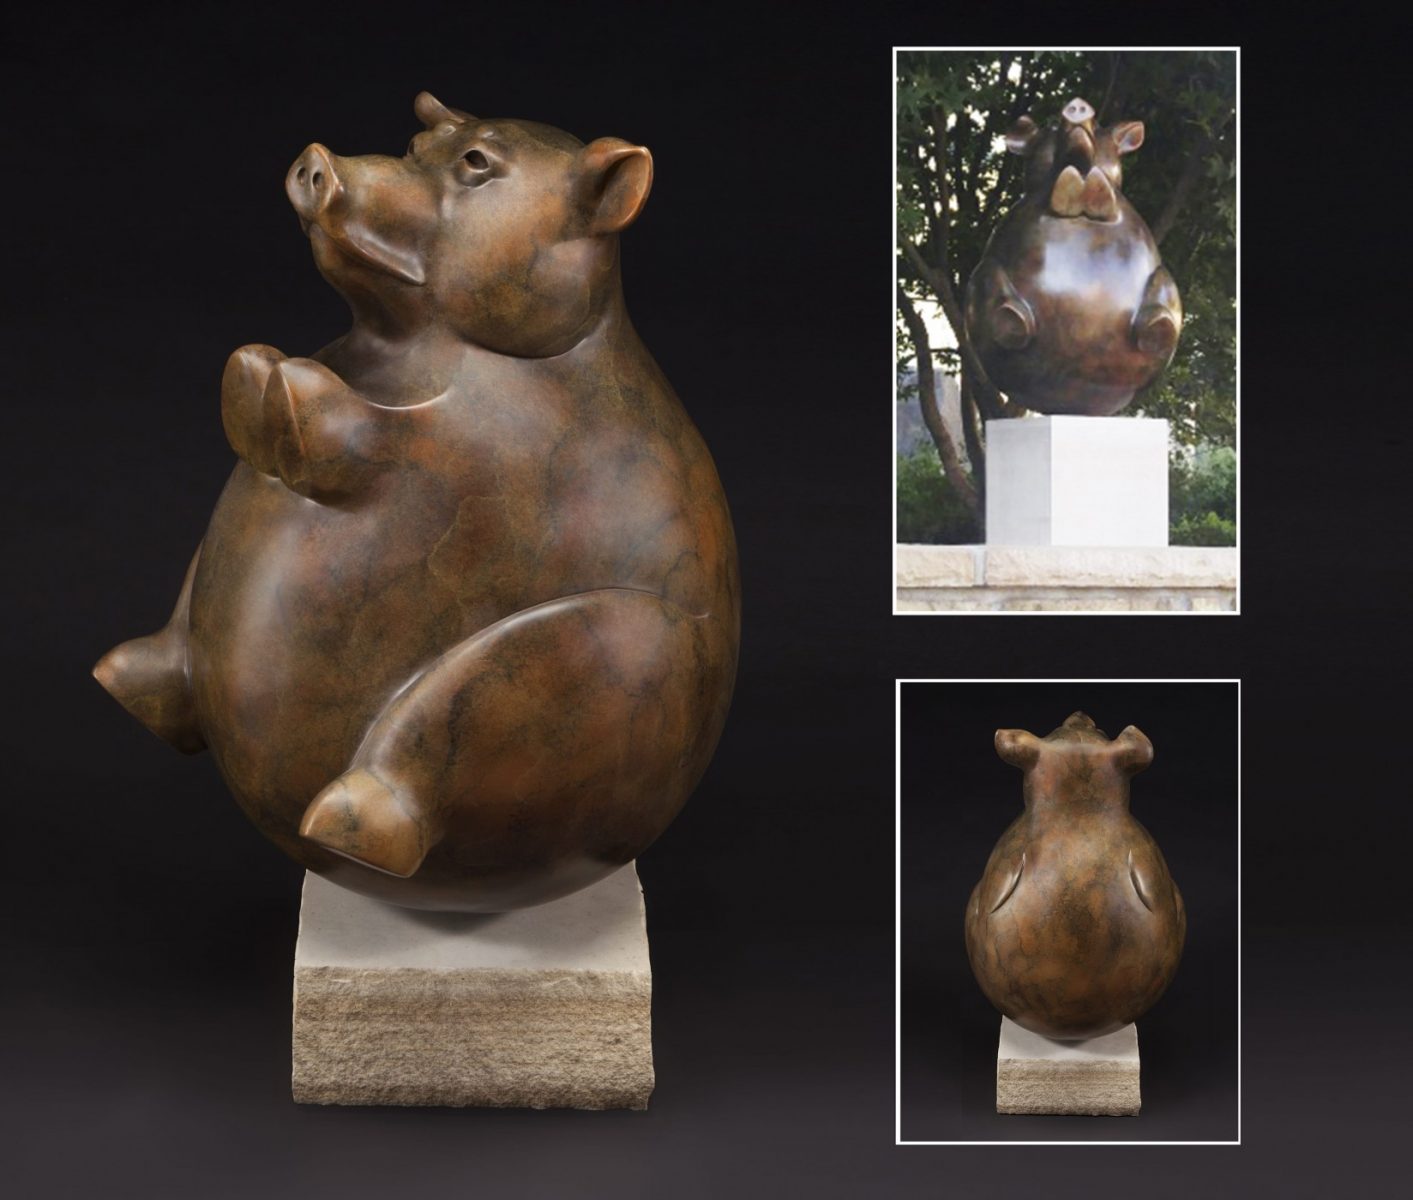 Whole Hog sculpture by Tim Cherry